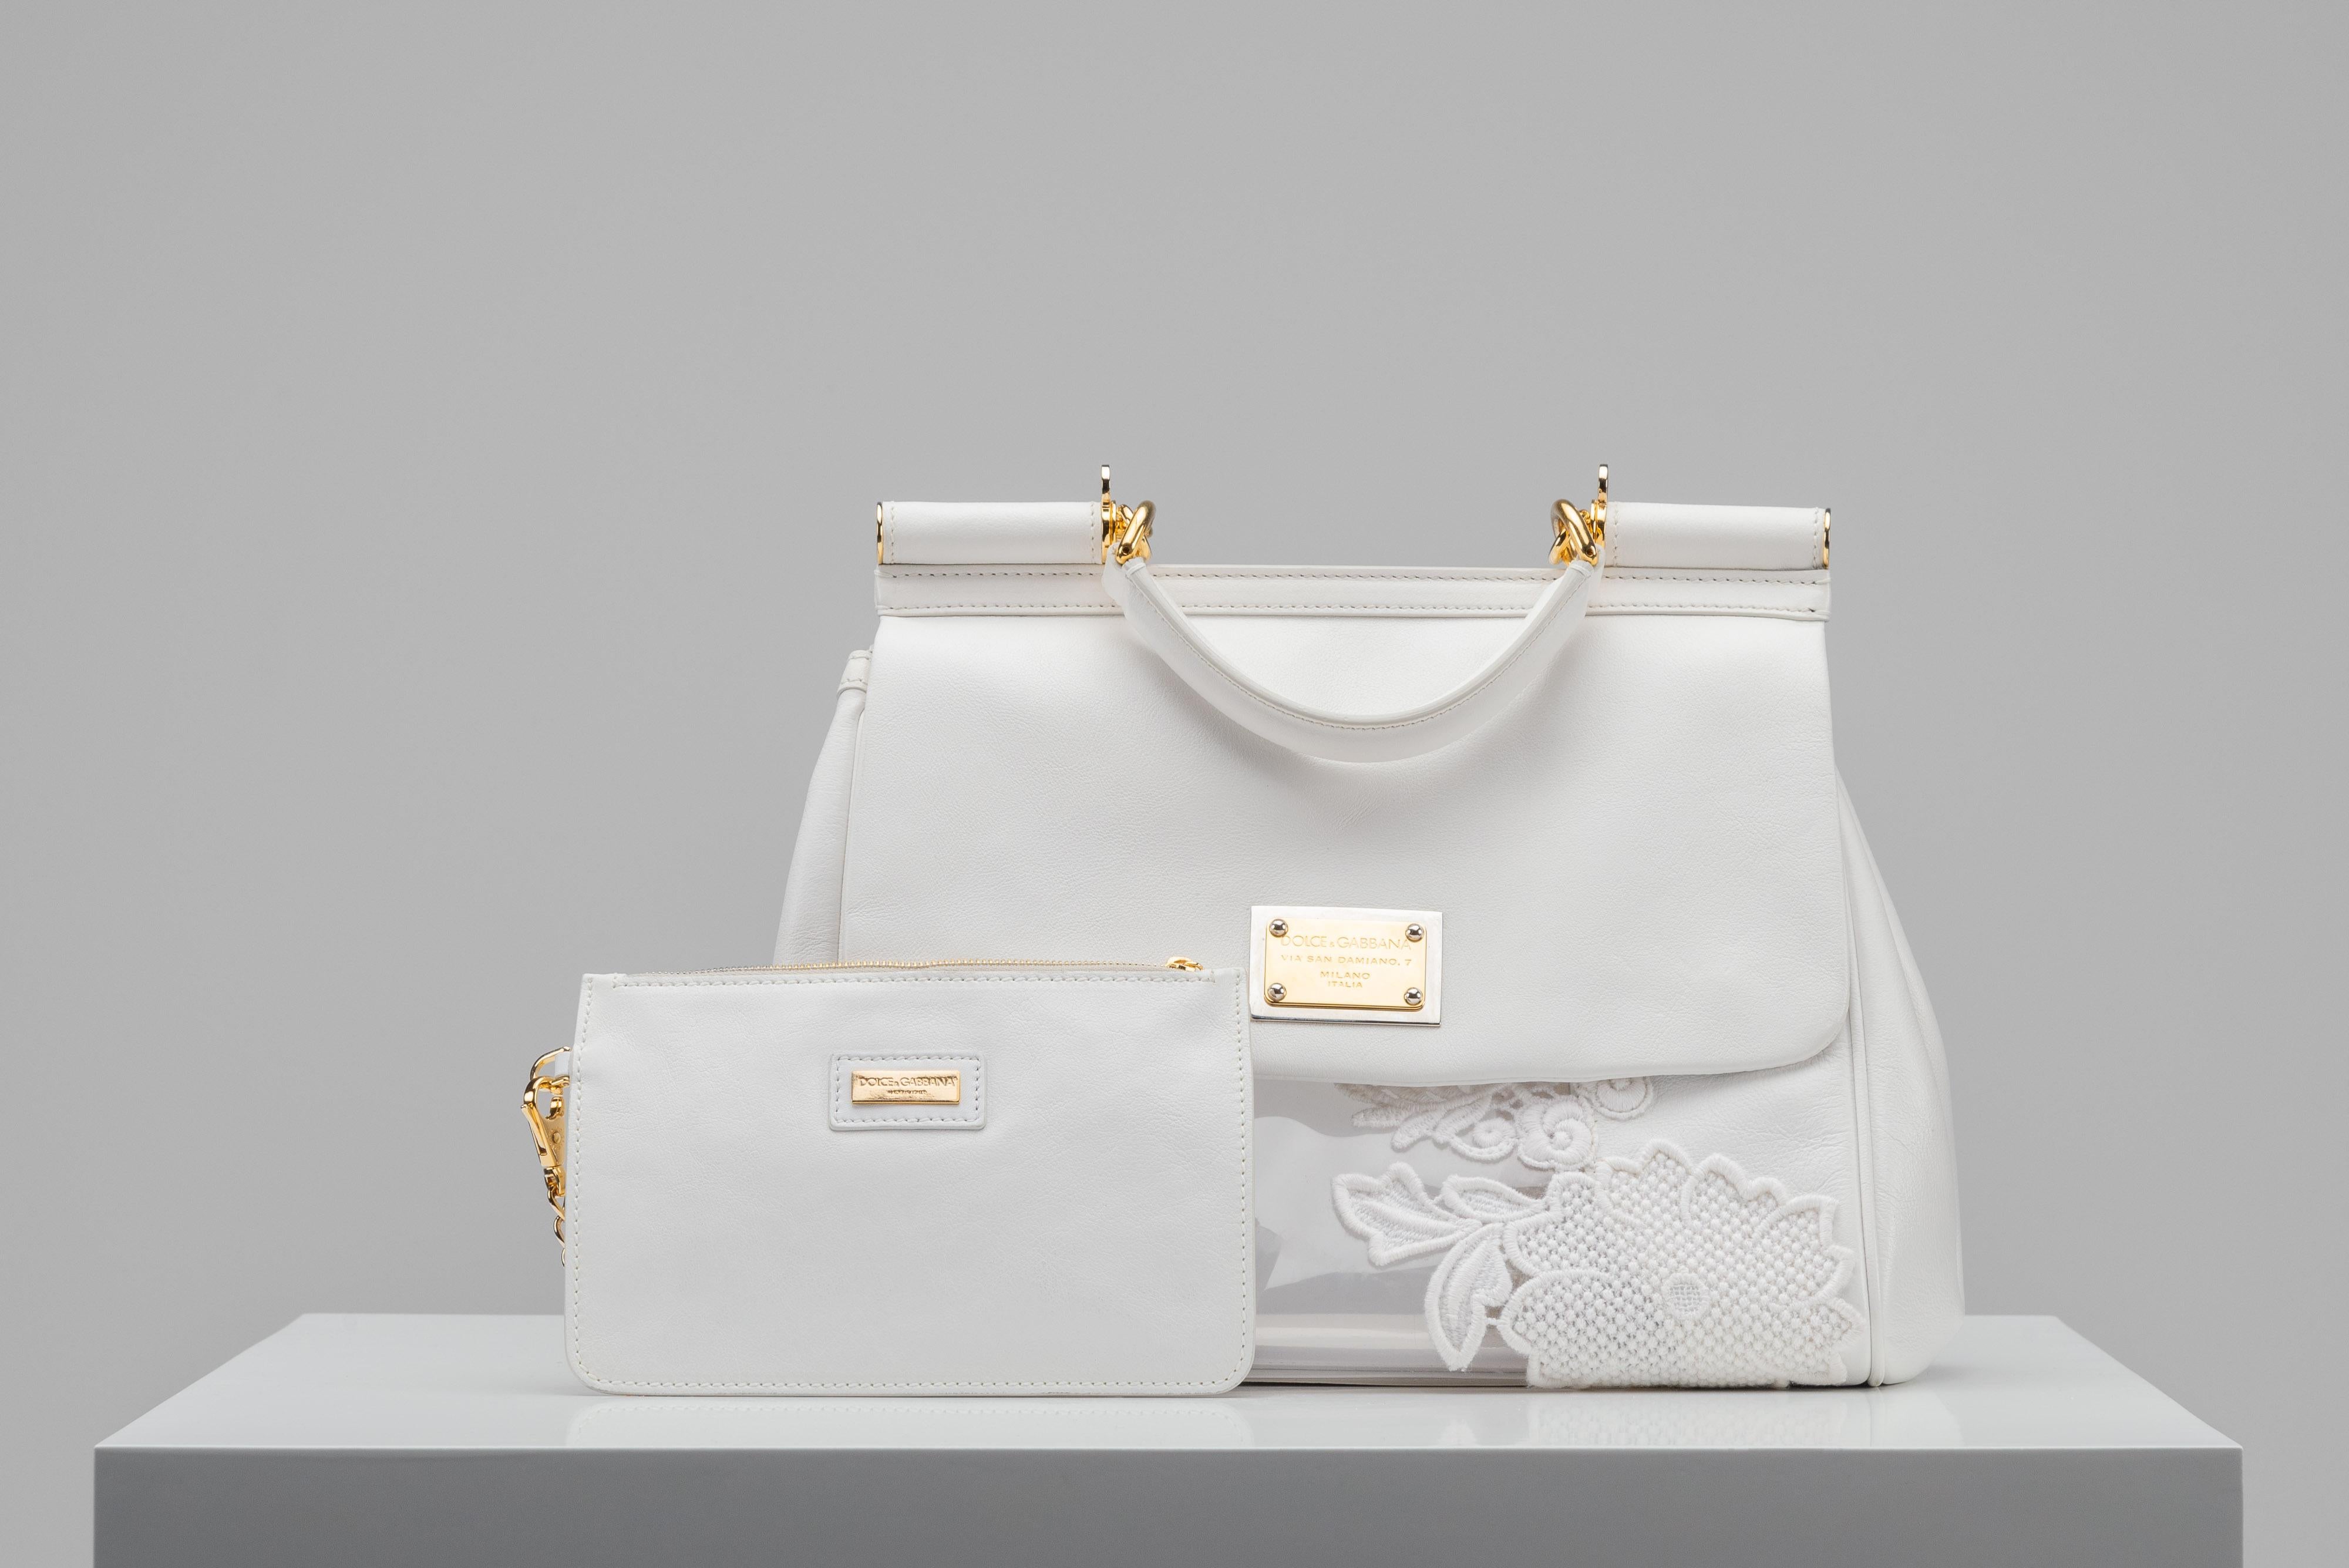 From the collection of SAVINETI we offer this Dolce & Gabbana Sicily Bag:
- Brand: Dolce & Gabbana
- Model: Sicily
- Color: White
- Condition: Good Condition
- Materials: dauphine leather

Authenticity is our core value at SAVINETI and this process